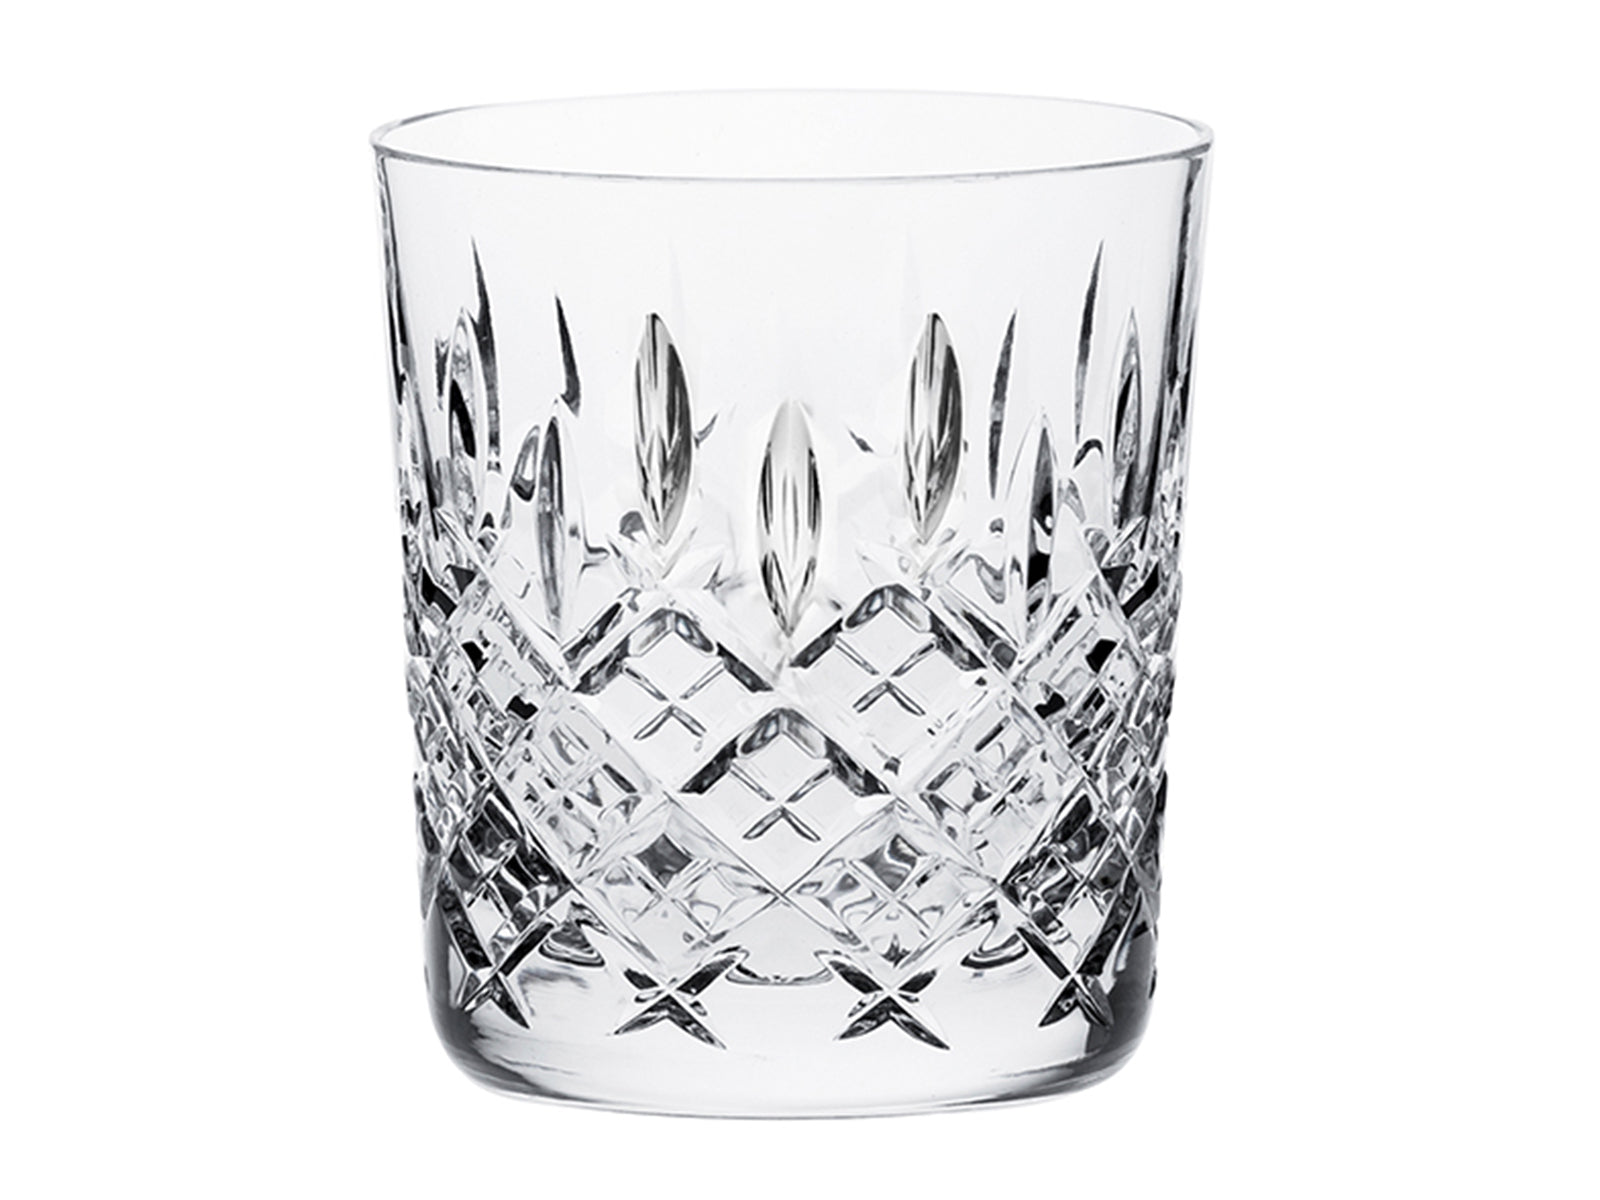 A straight-edged crystal tumbler featuring a cut design made up of a bed of diamonds, topped with single darts pointing up towards the rim